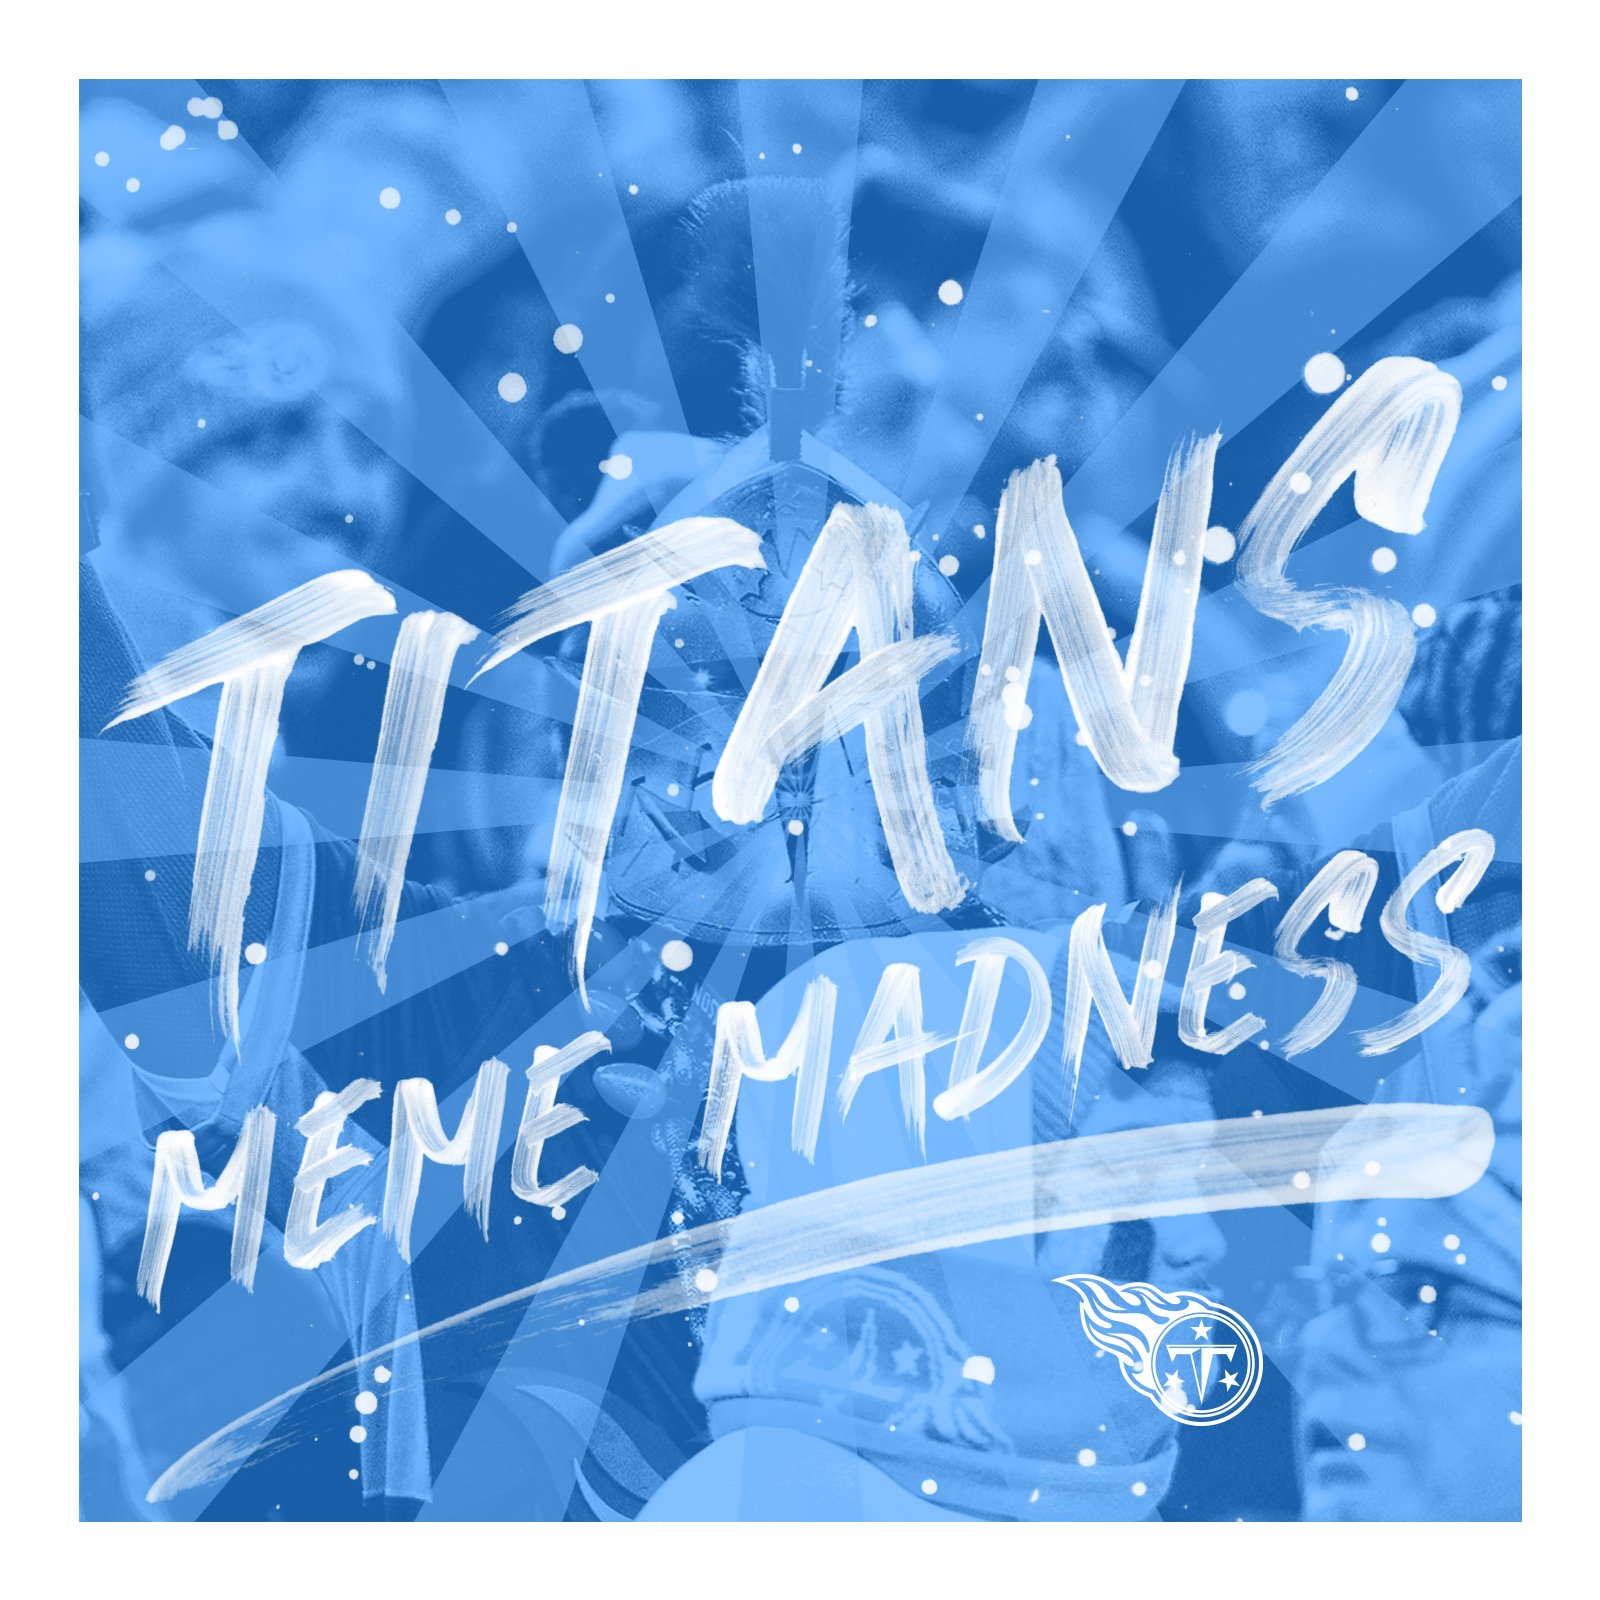 Tennessee Titans On Twitter Sixteen Memes One Winner Titans Mememadness Kicks Off Tonight We Re Letting You Decide The Best Titanssubreddit Meme With The Winner Receiving A Vip Titans Training Camp